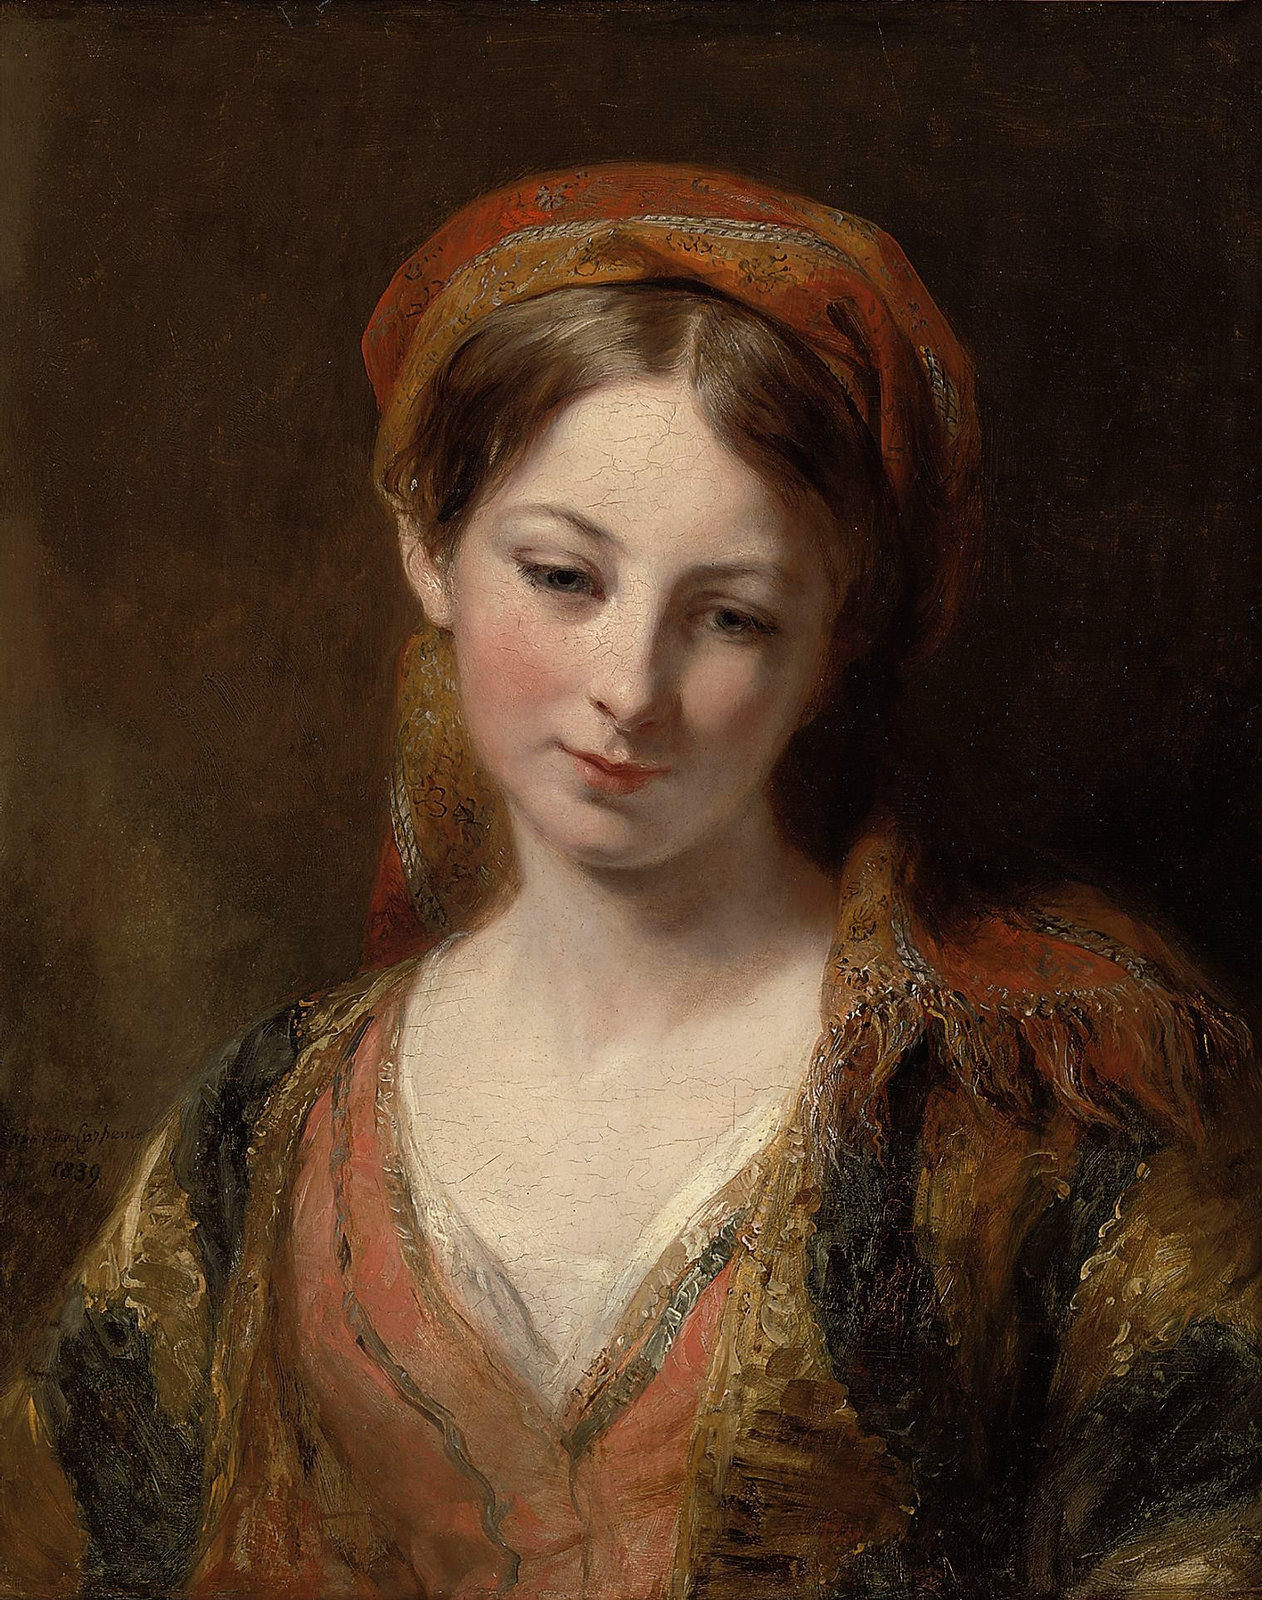 Portrait of a Young Girl by Margaret Sarah Carpenter, 1839